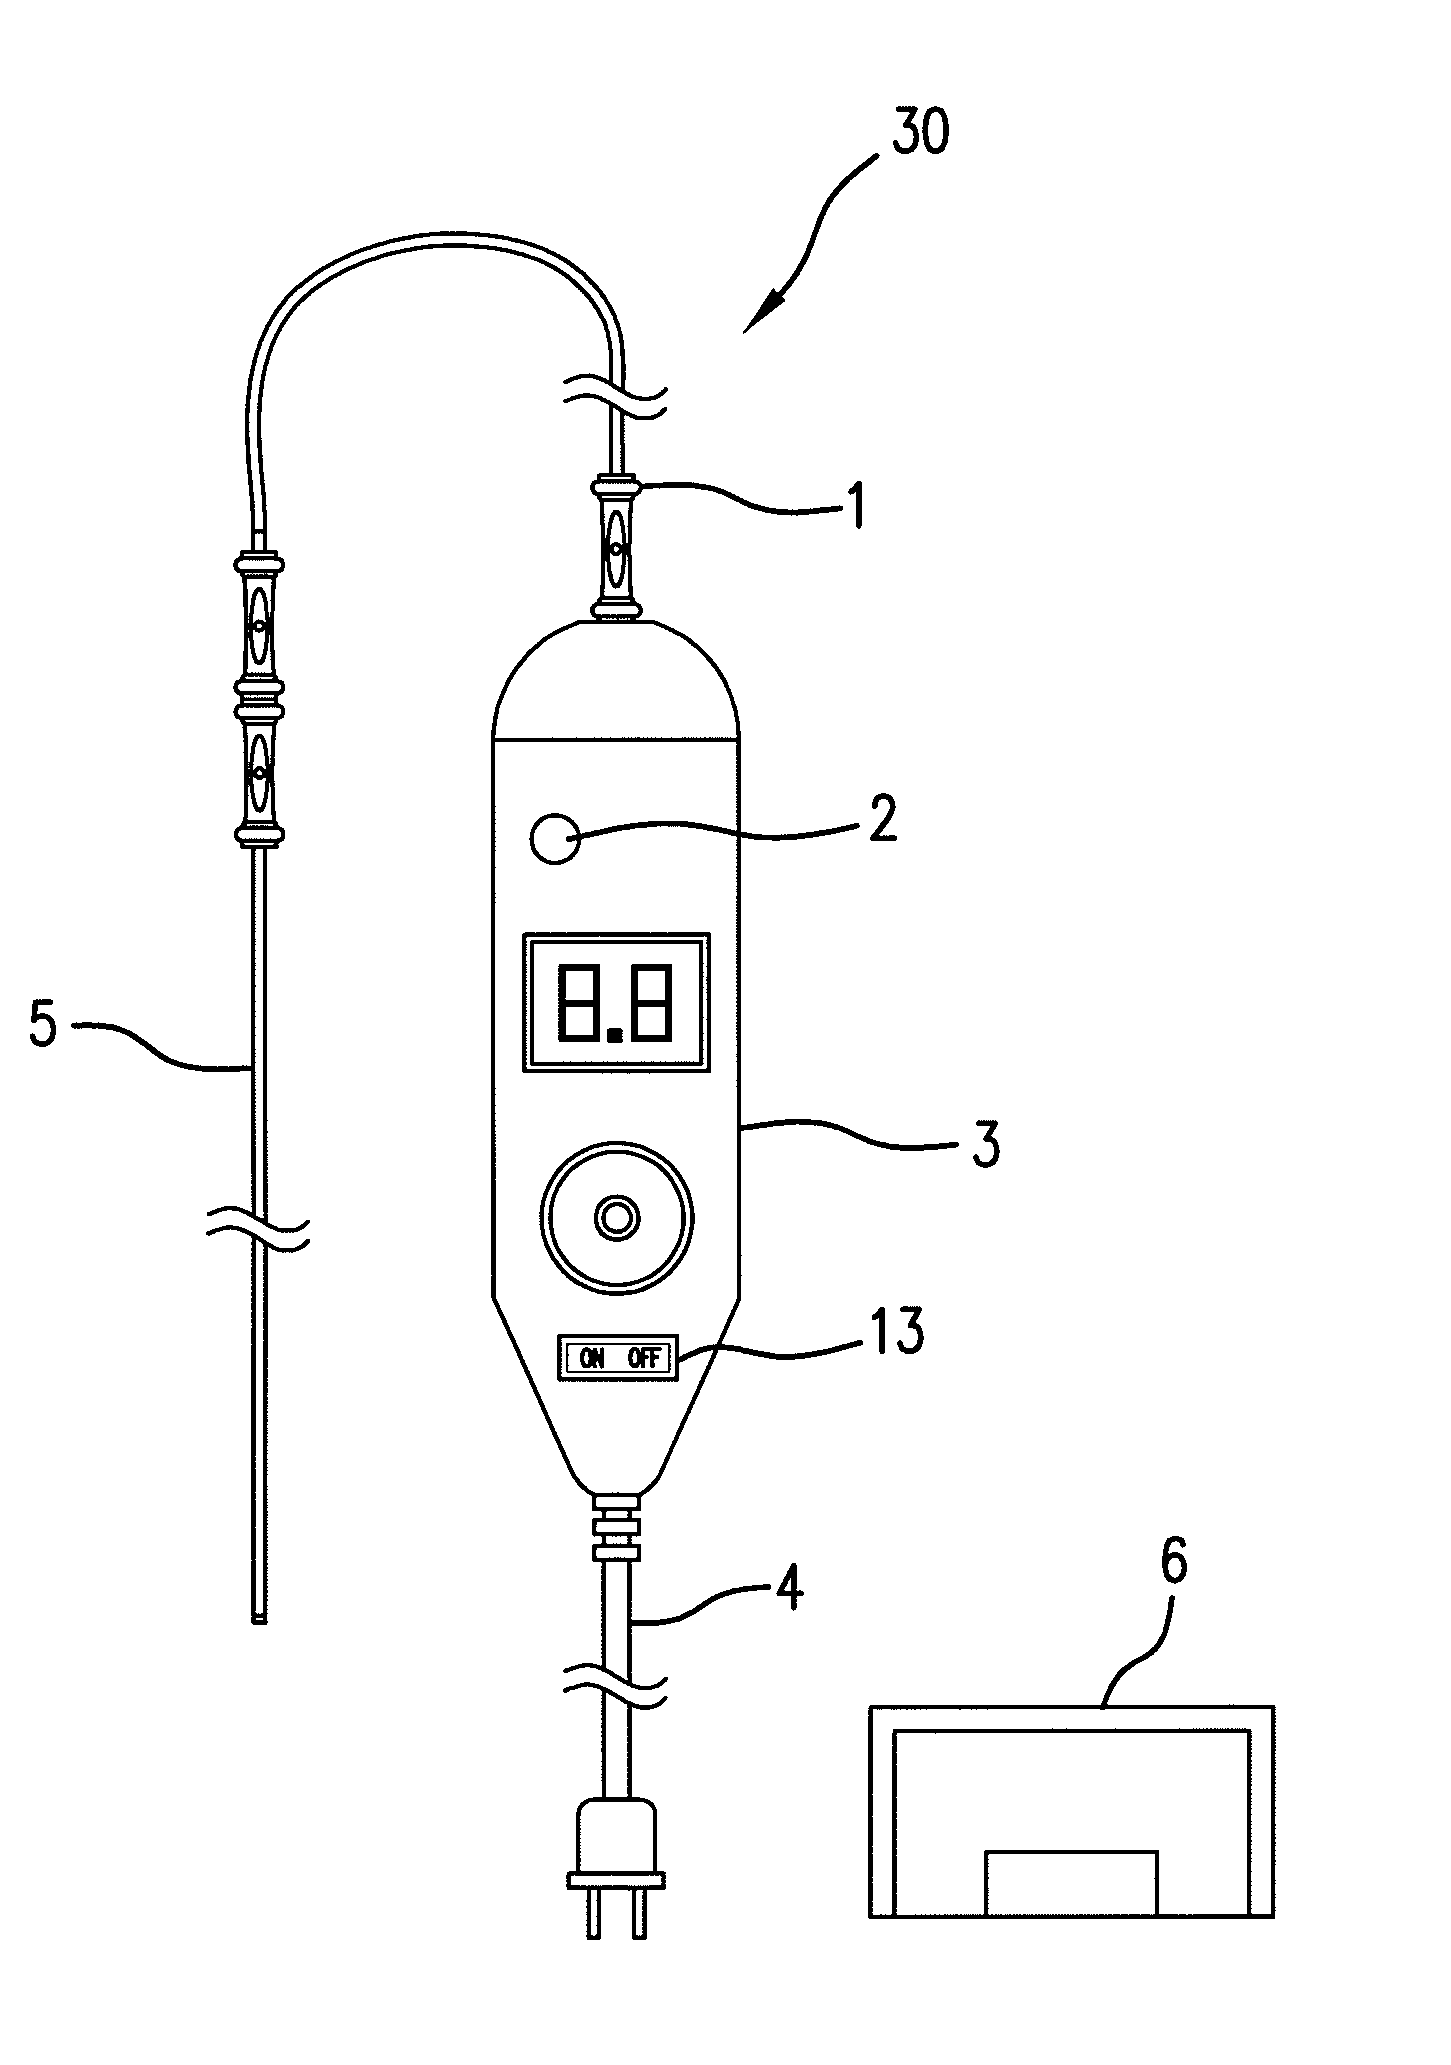 Flexible infrared delivery apparatus and method